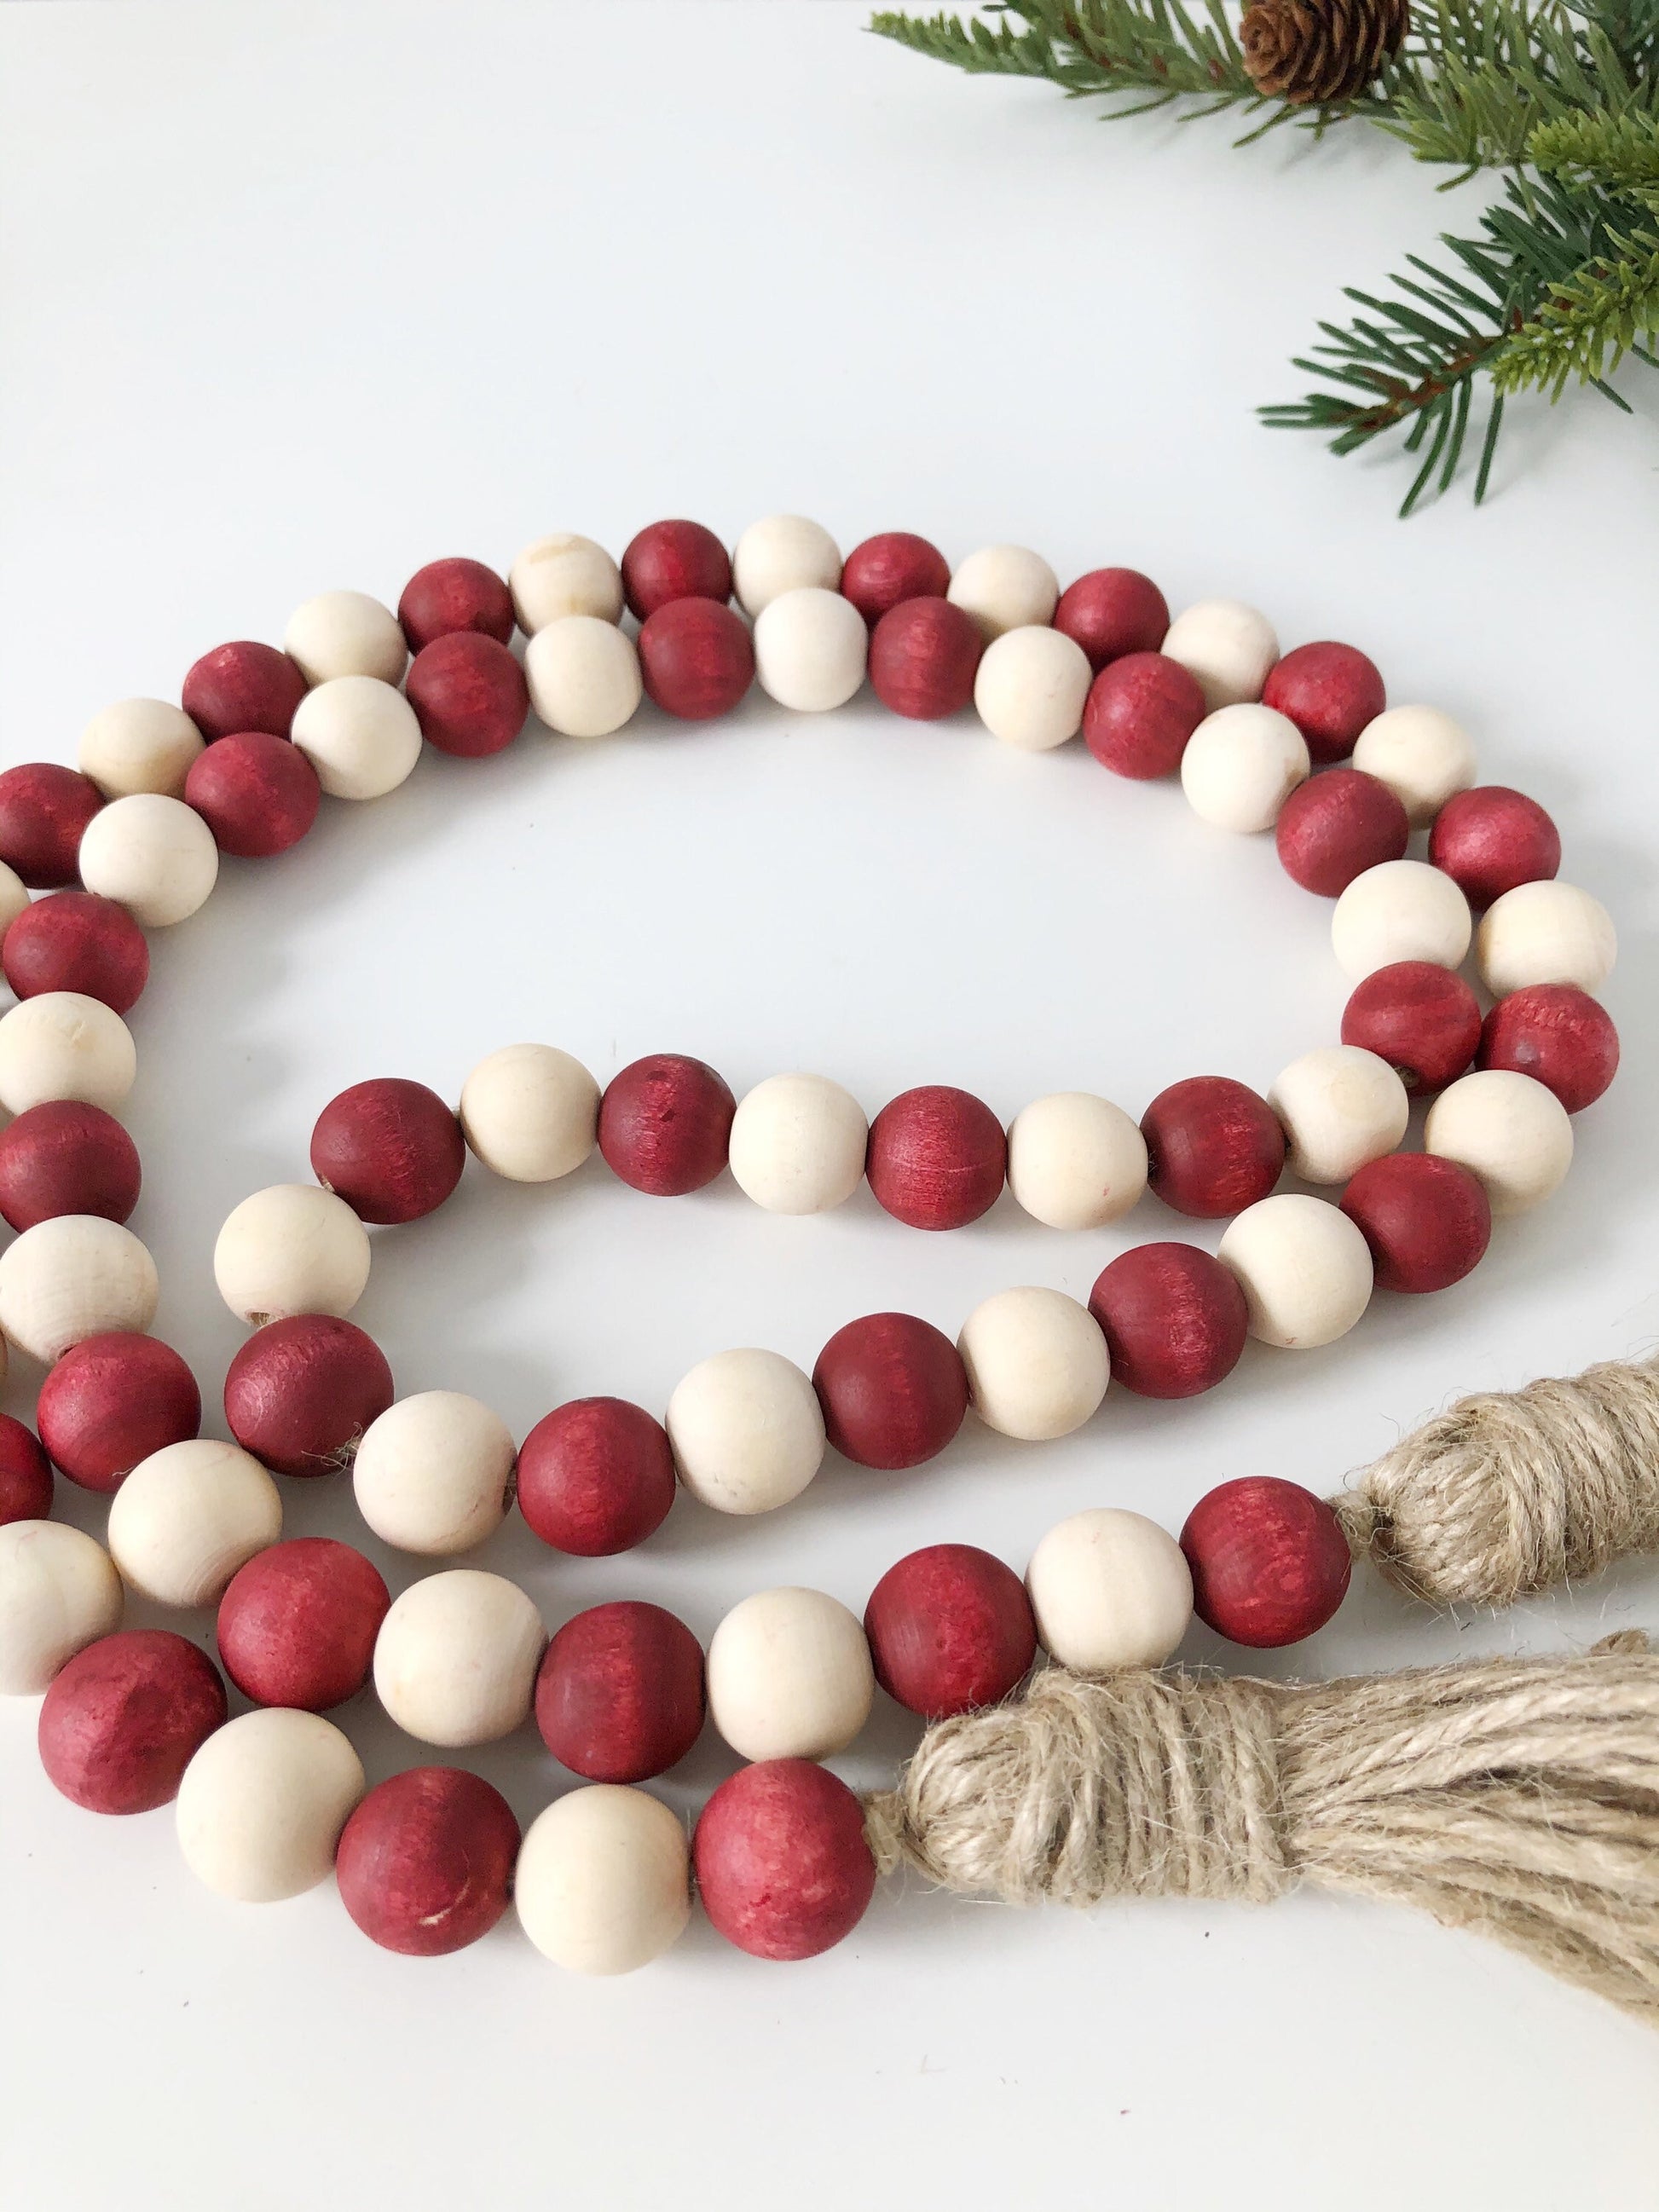 Rae Dunn Inspired Valentine's Day Heart Red White Farmhouse Wood Bead  Garland